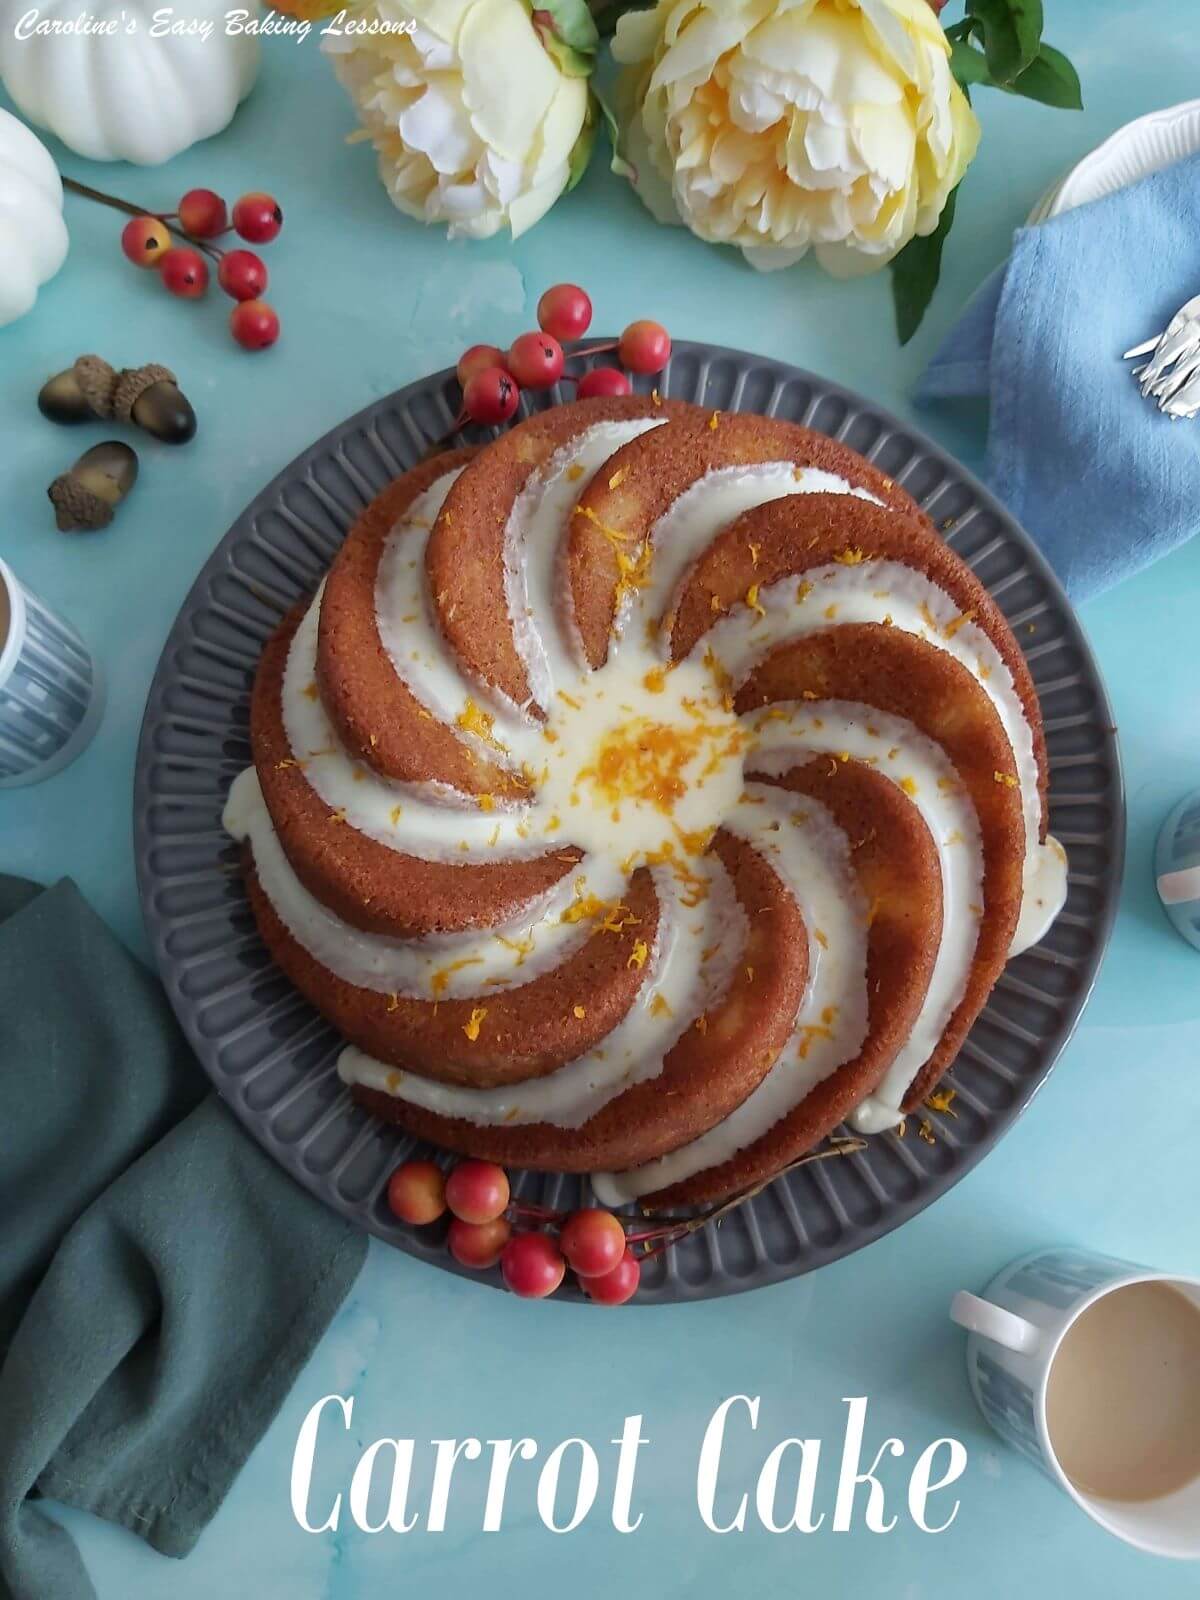 Overhead shot of a carrot cake baked in a budt pan with cream cheese frosting down the groves and set on a dinning table with titel.